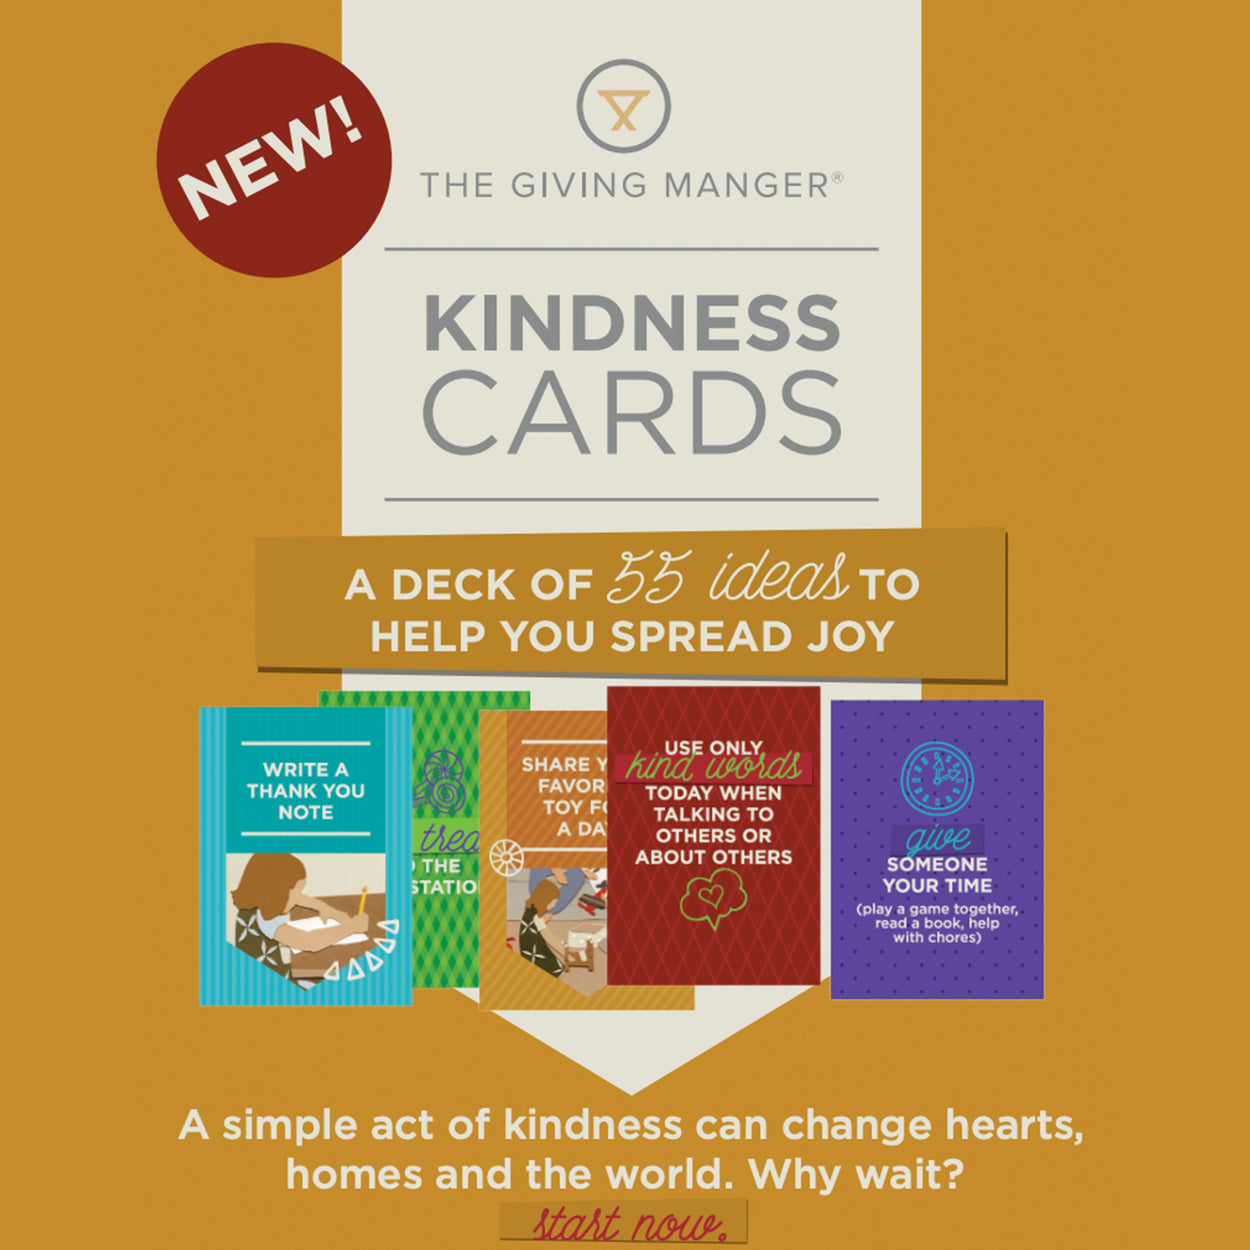 Kindness Cards are a deck of 55 ideas to help you teach kids to give back in their community